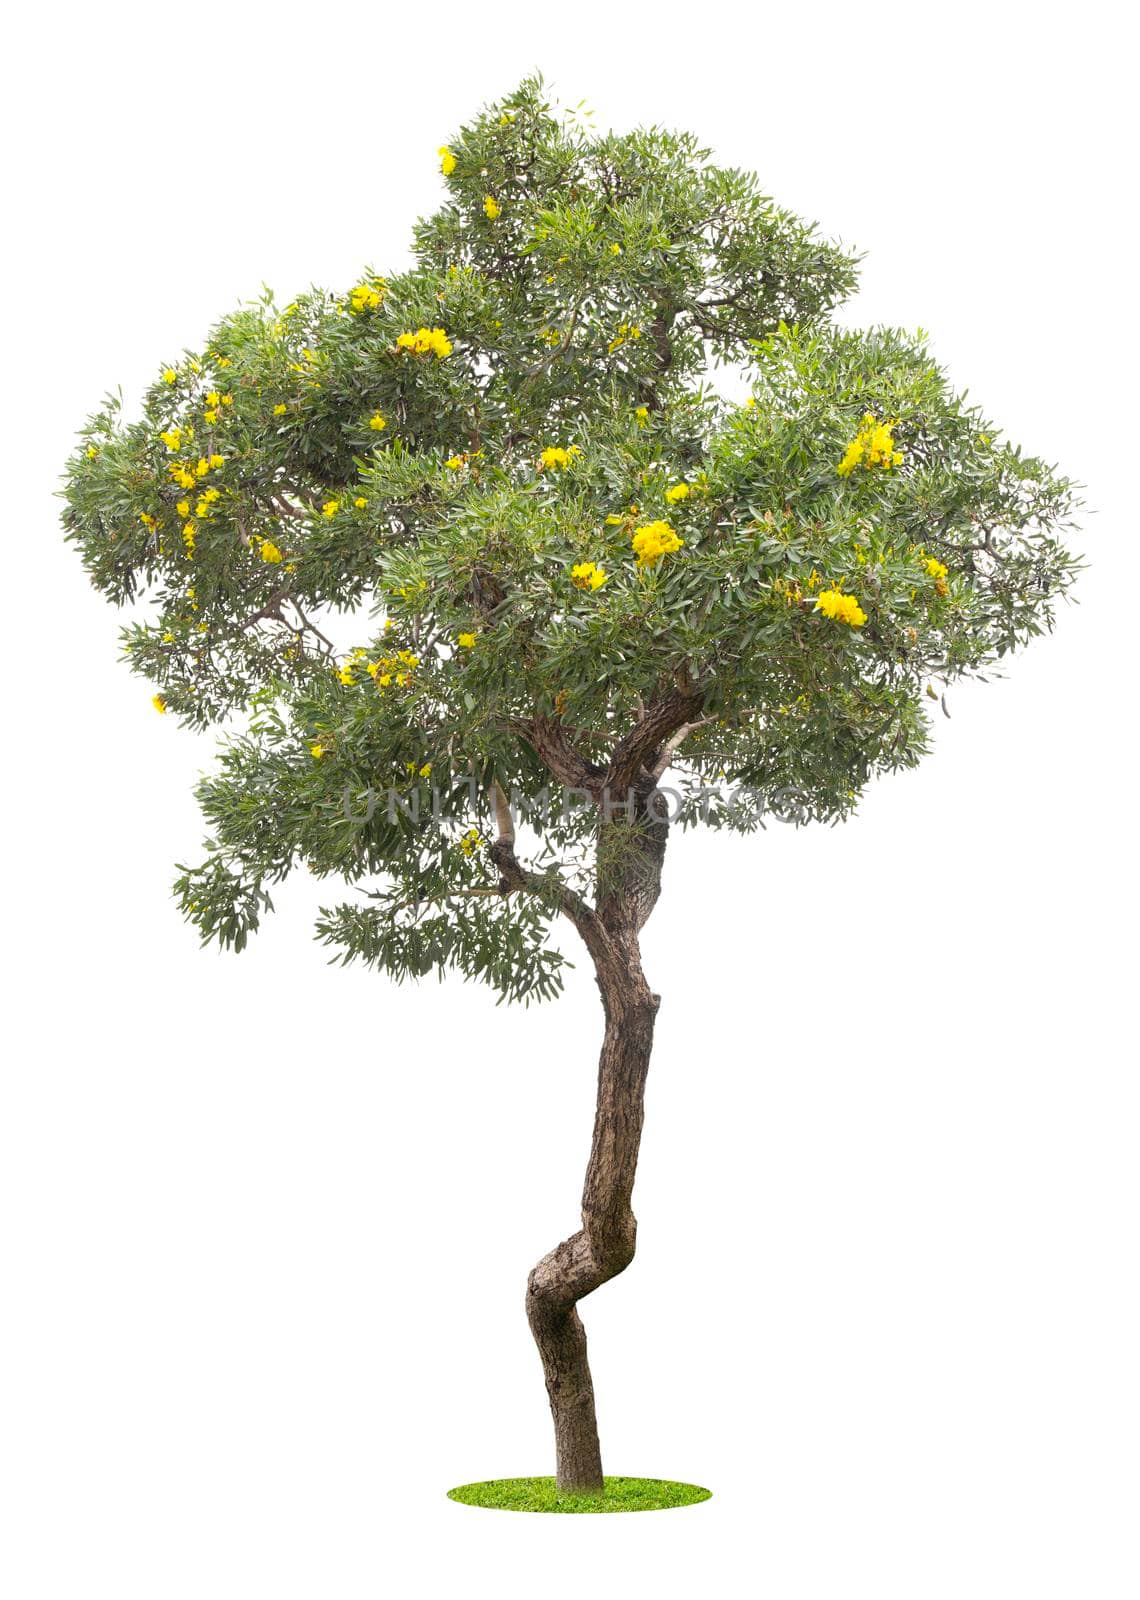 The freshness big green tree with yellow flowers isolated on white background.